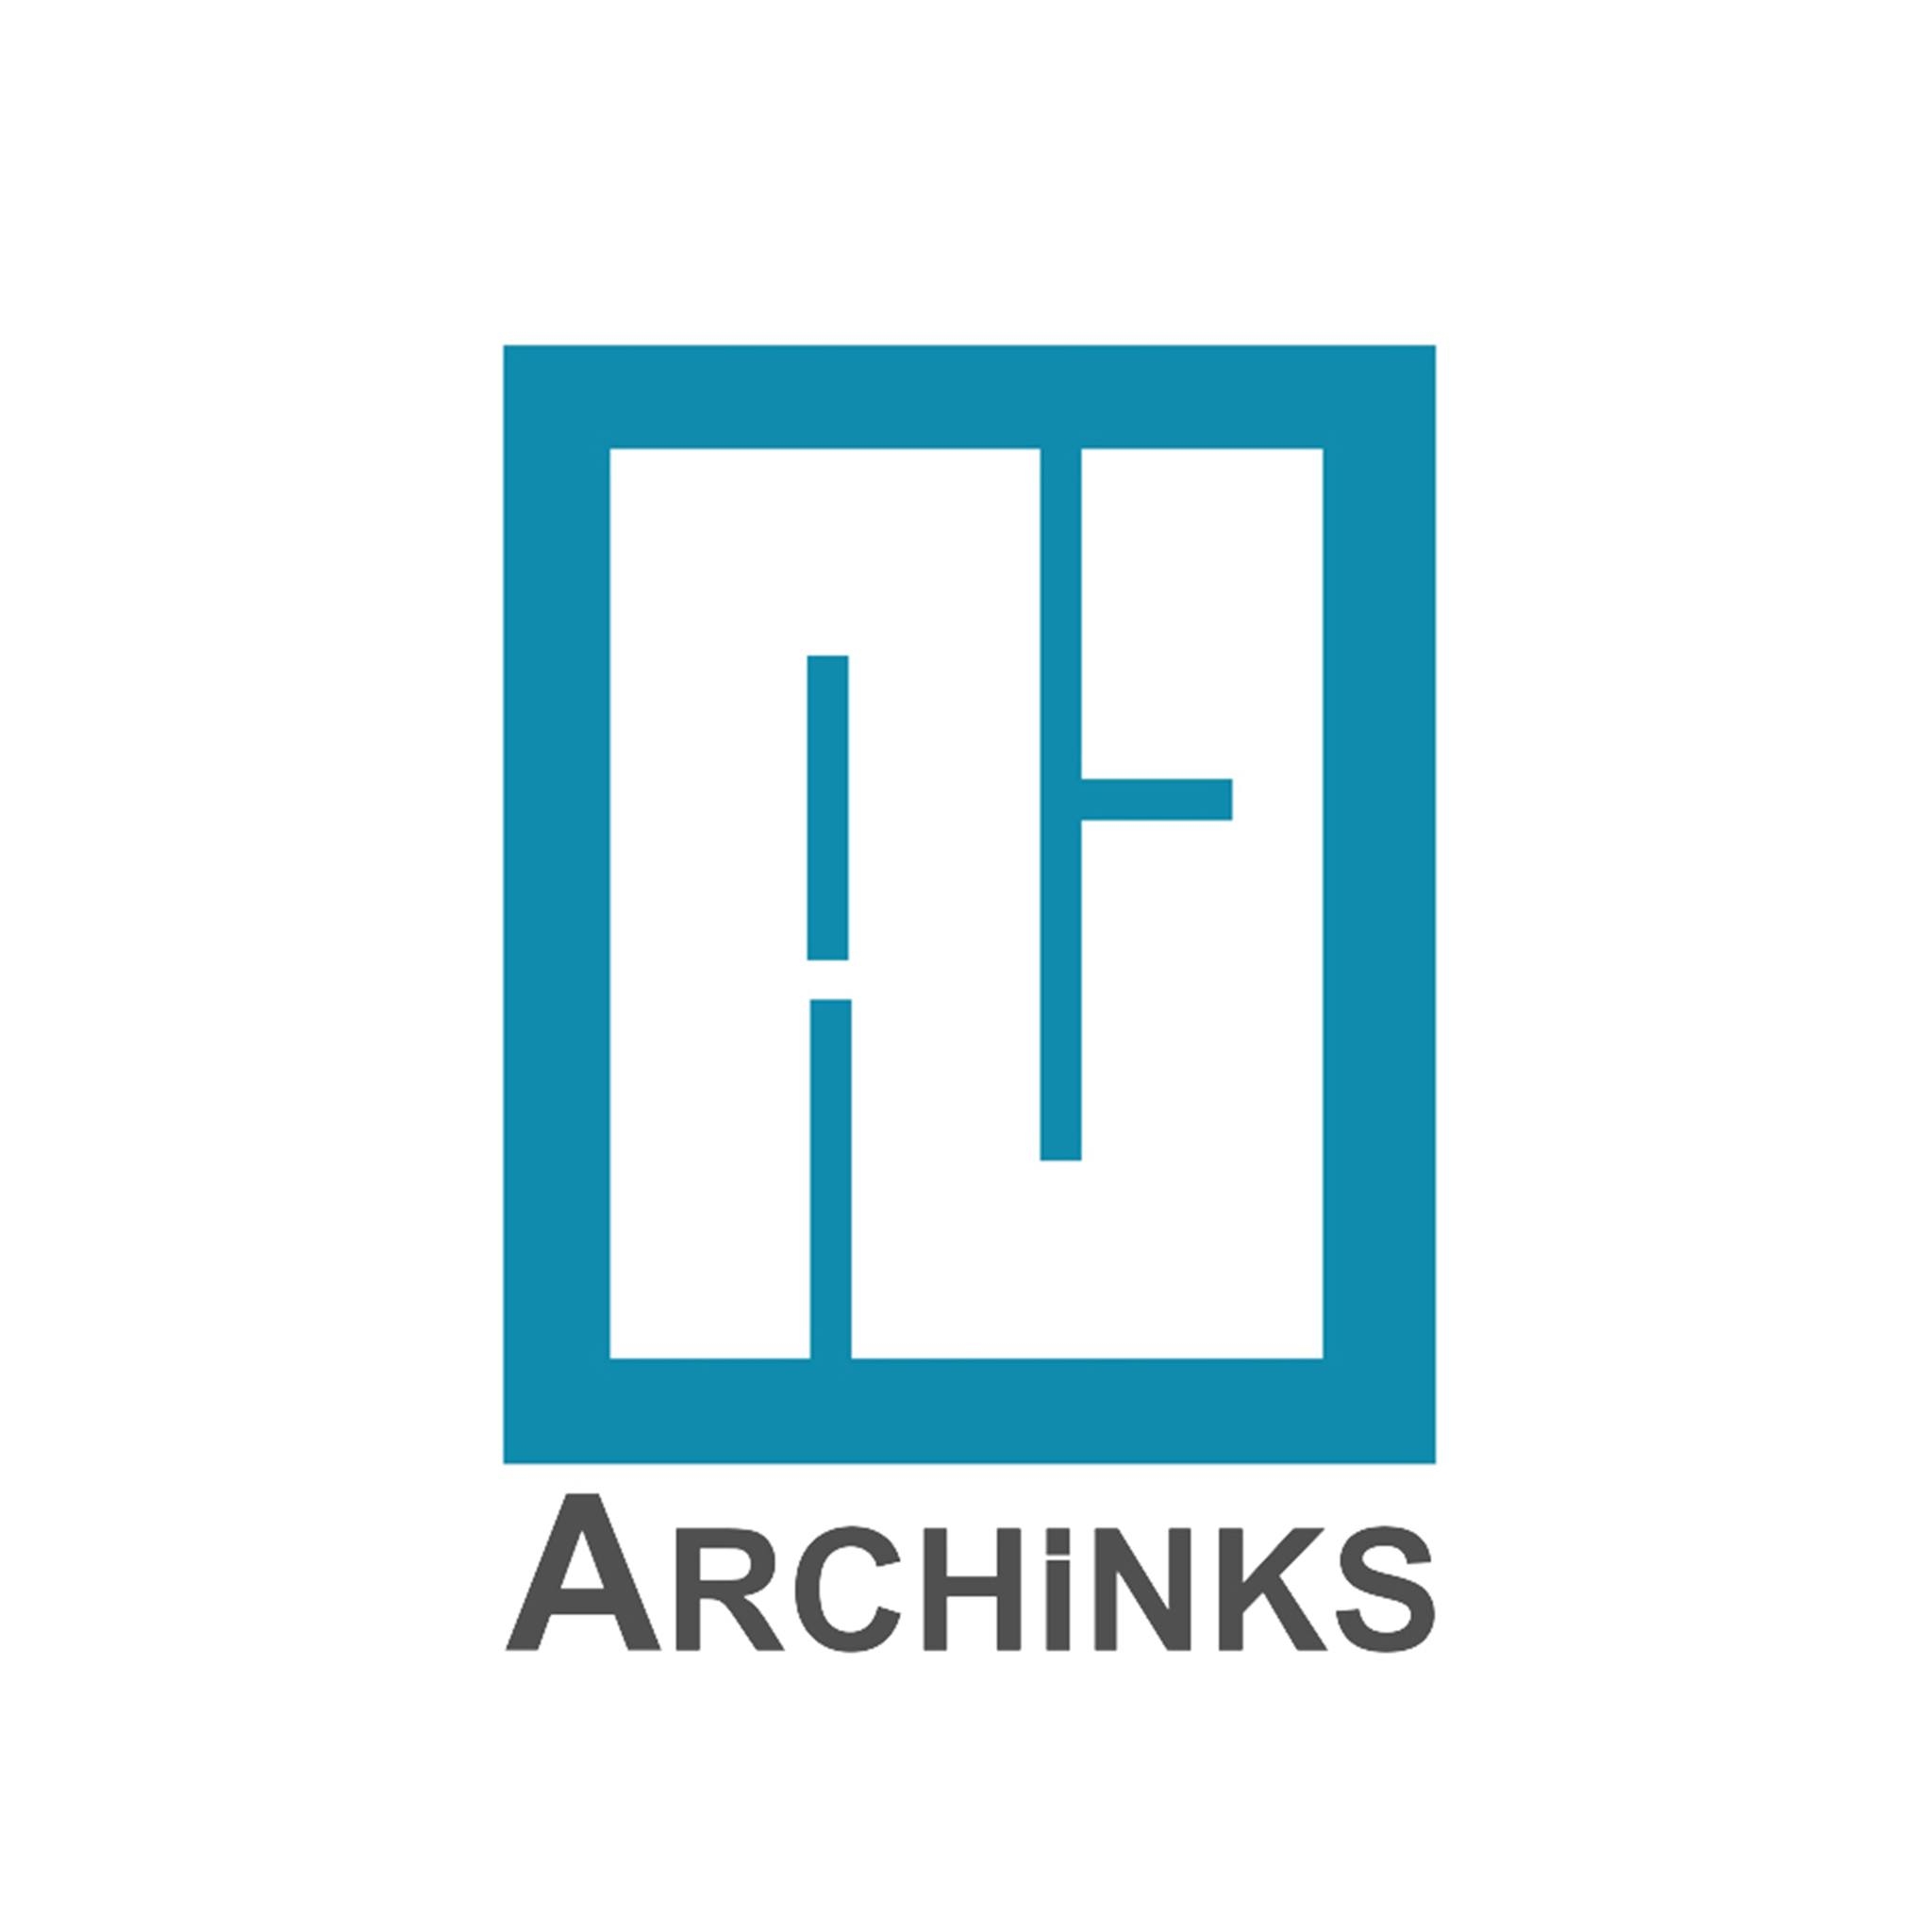 Archinks Indore (Architects | Planners | Interior Designers)|Accounting Services|Professional Services